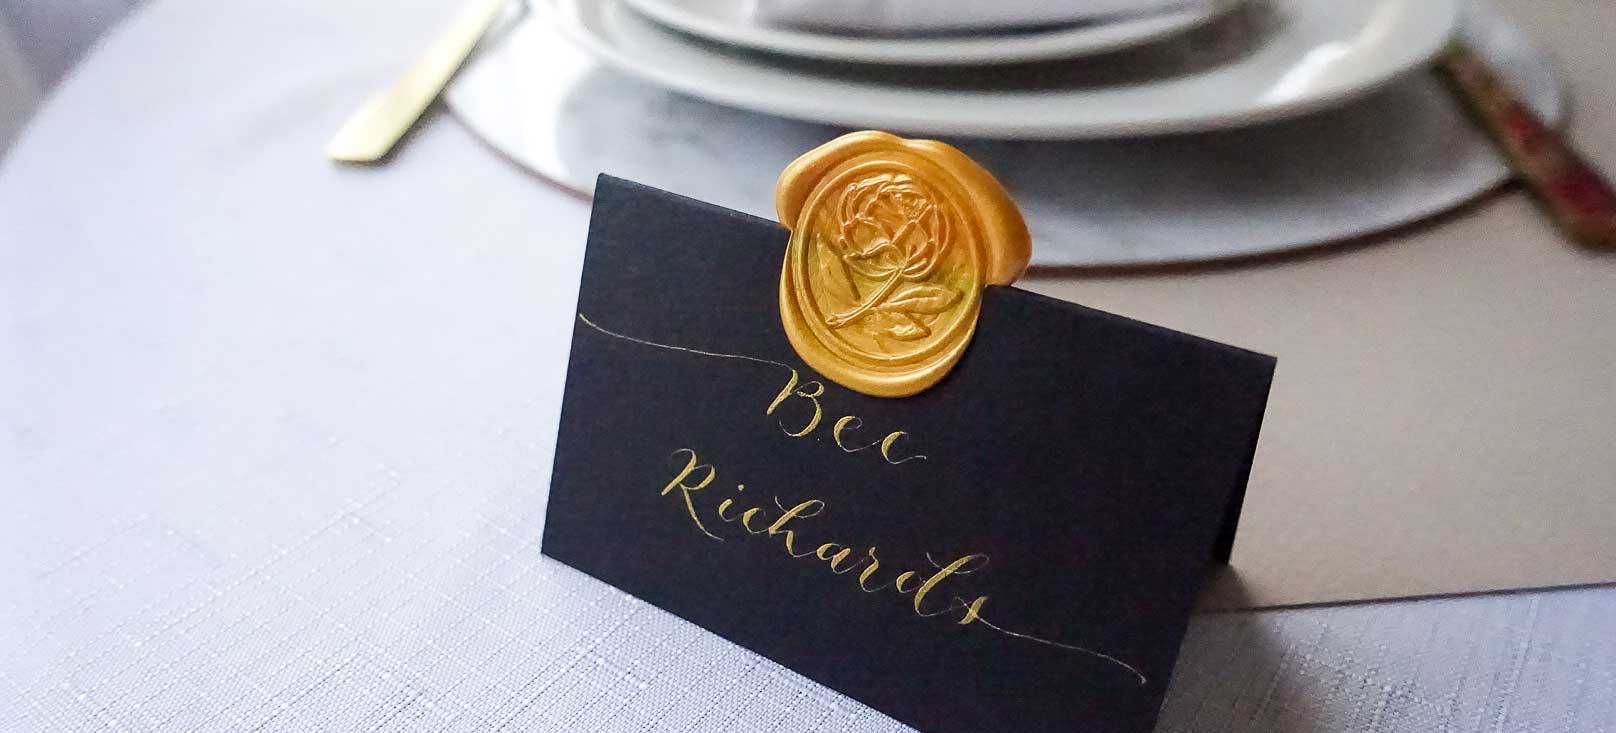 Wedding place card with wax seal